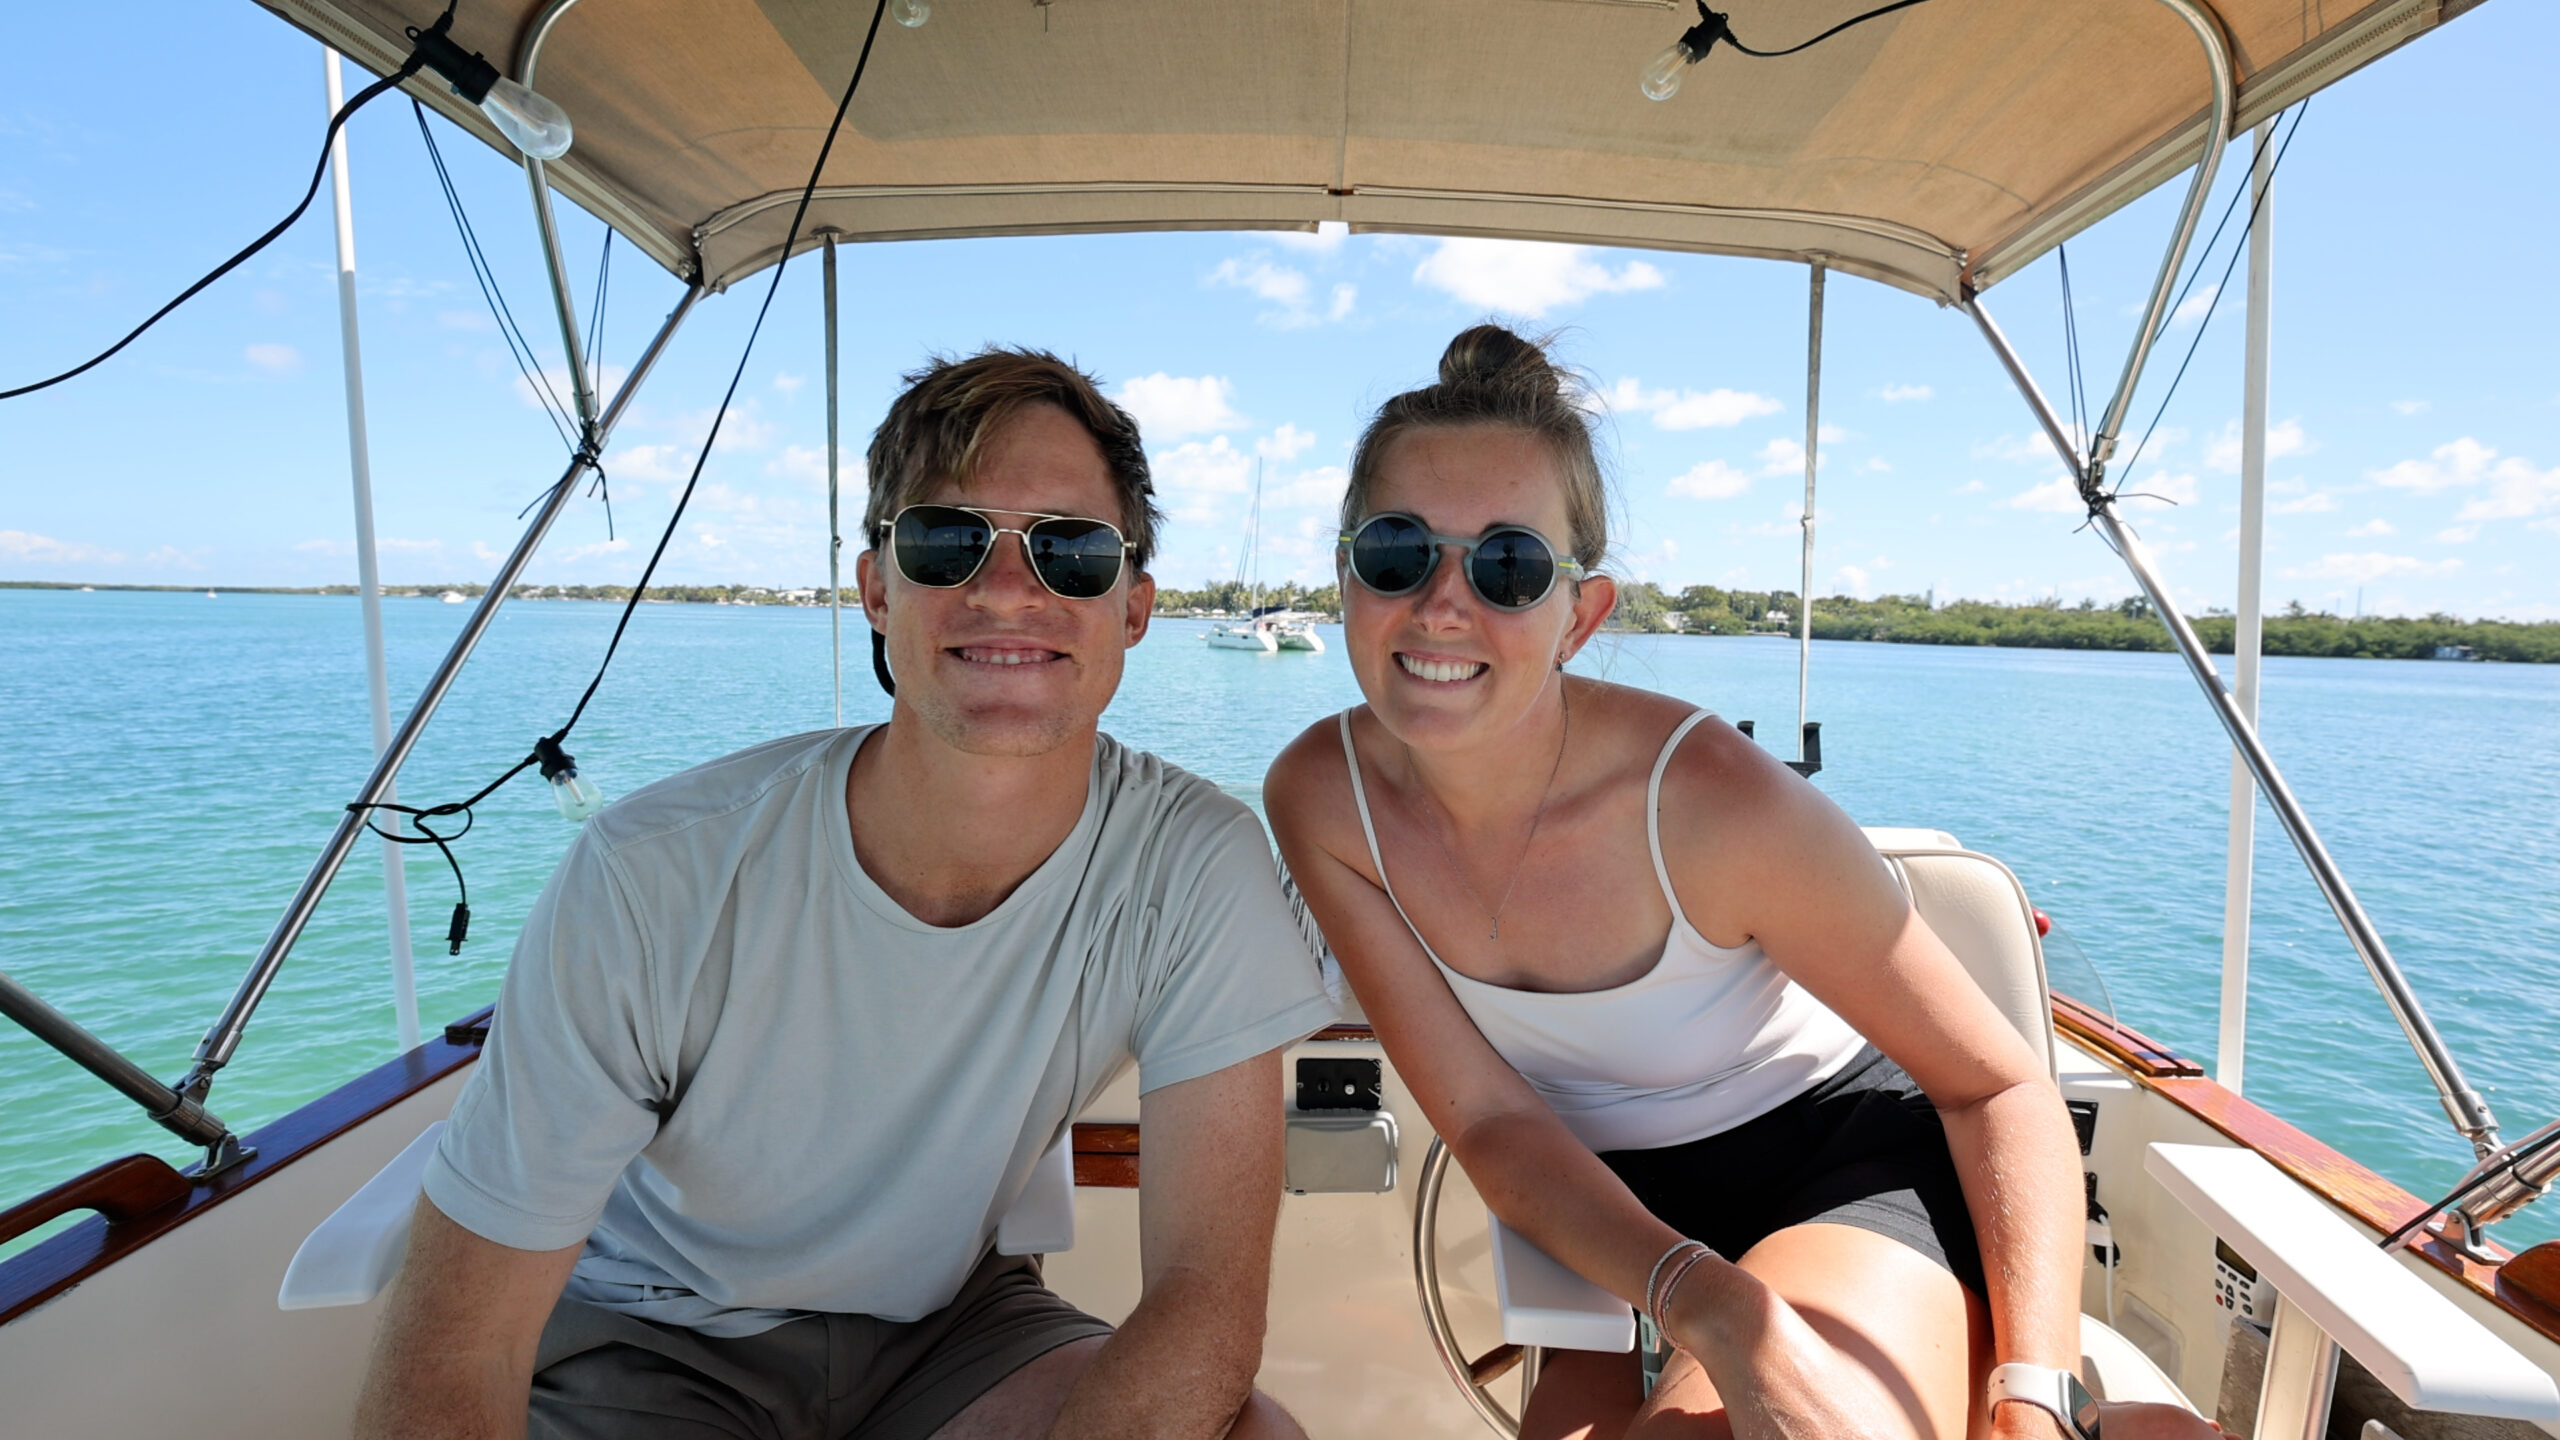 Scho & Jo Q&A | Boating, Relationships, AGL, Boat Dogs, and More!